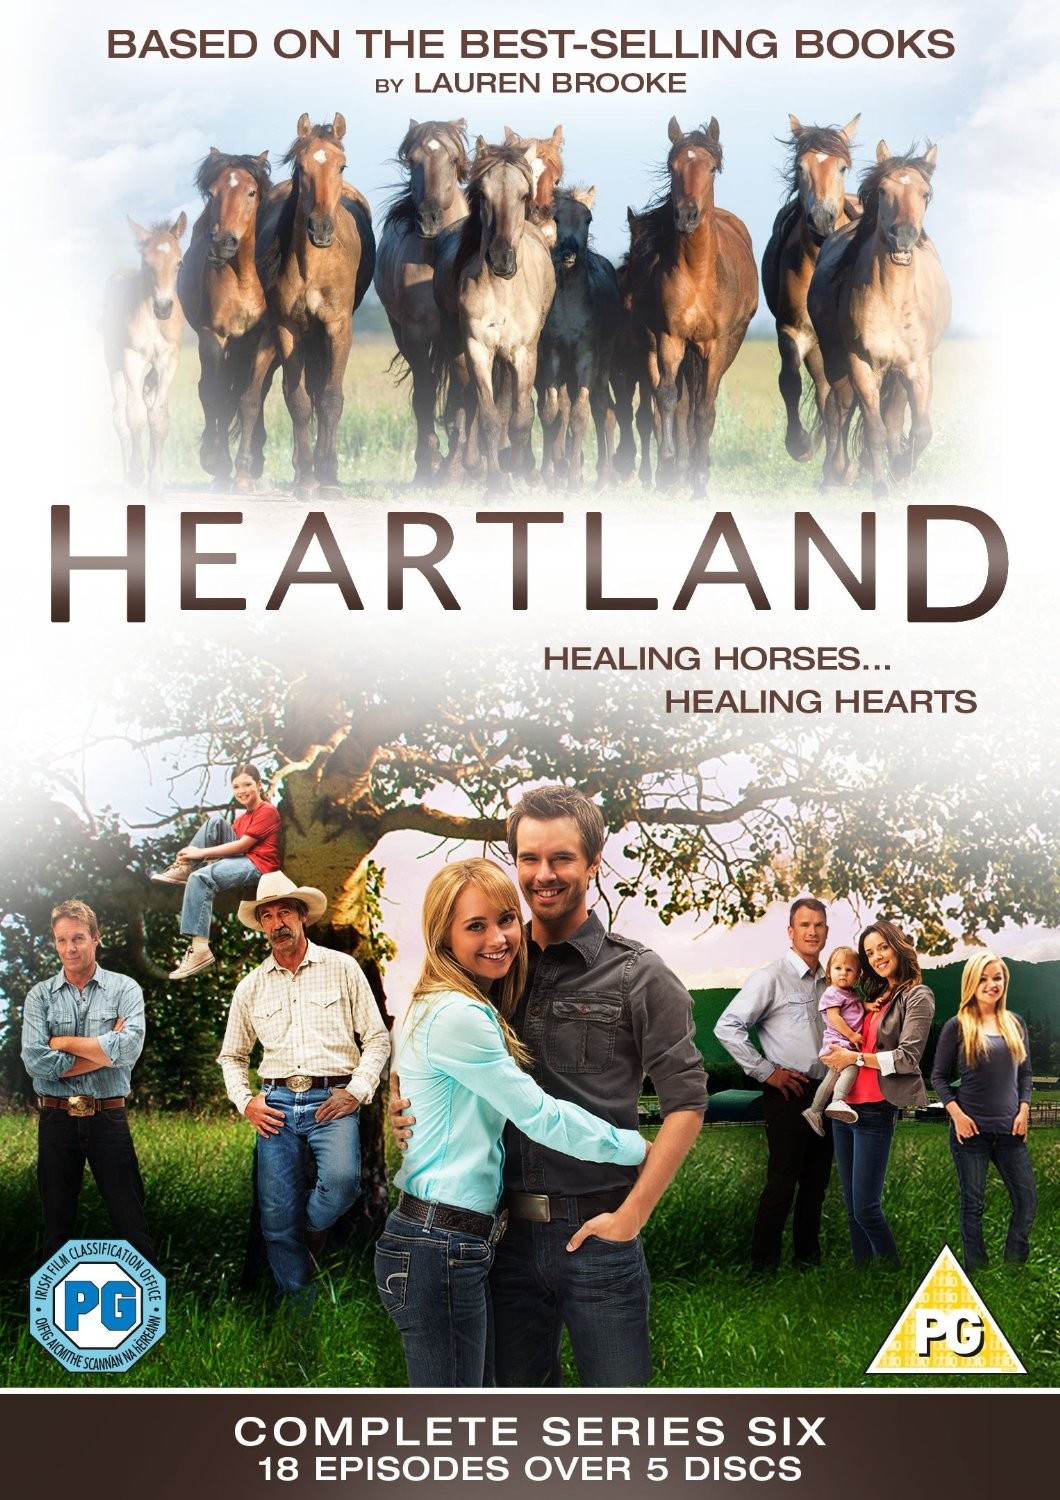 Heartland The Complete Series Six DVD Box Set from trot-online